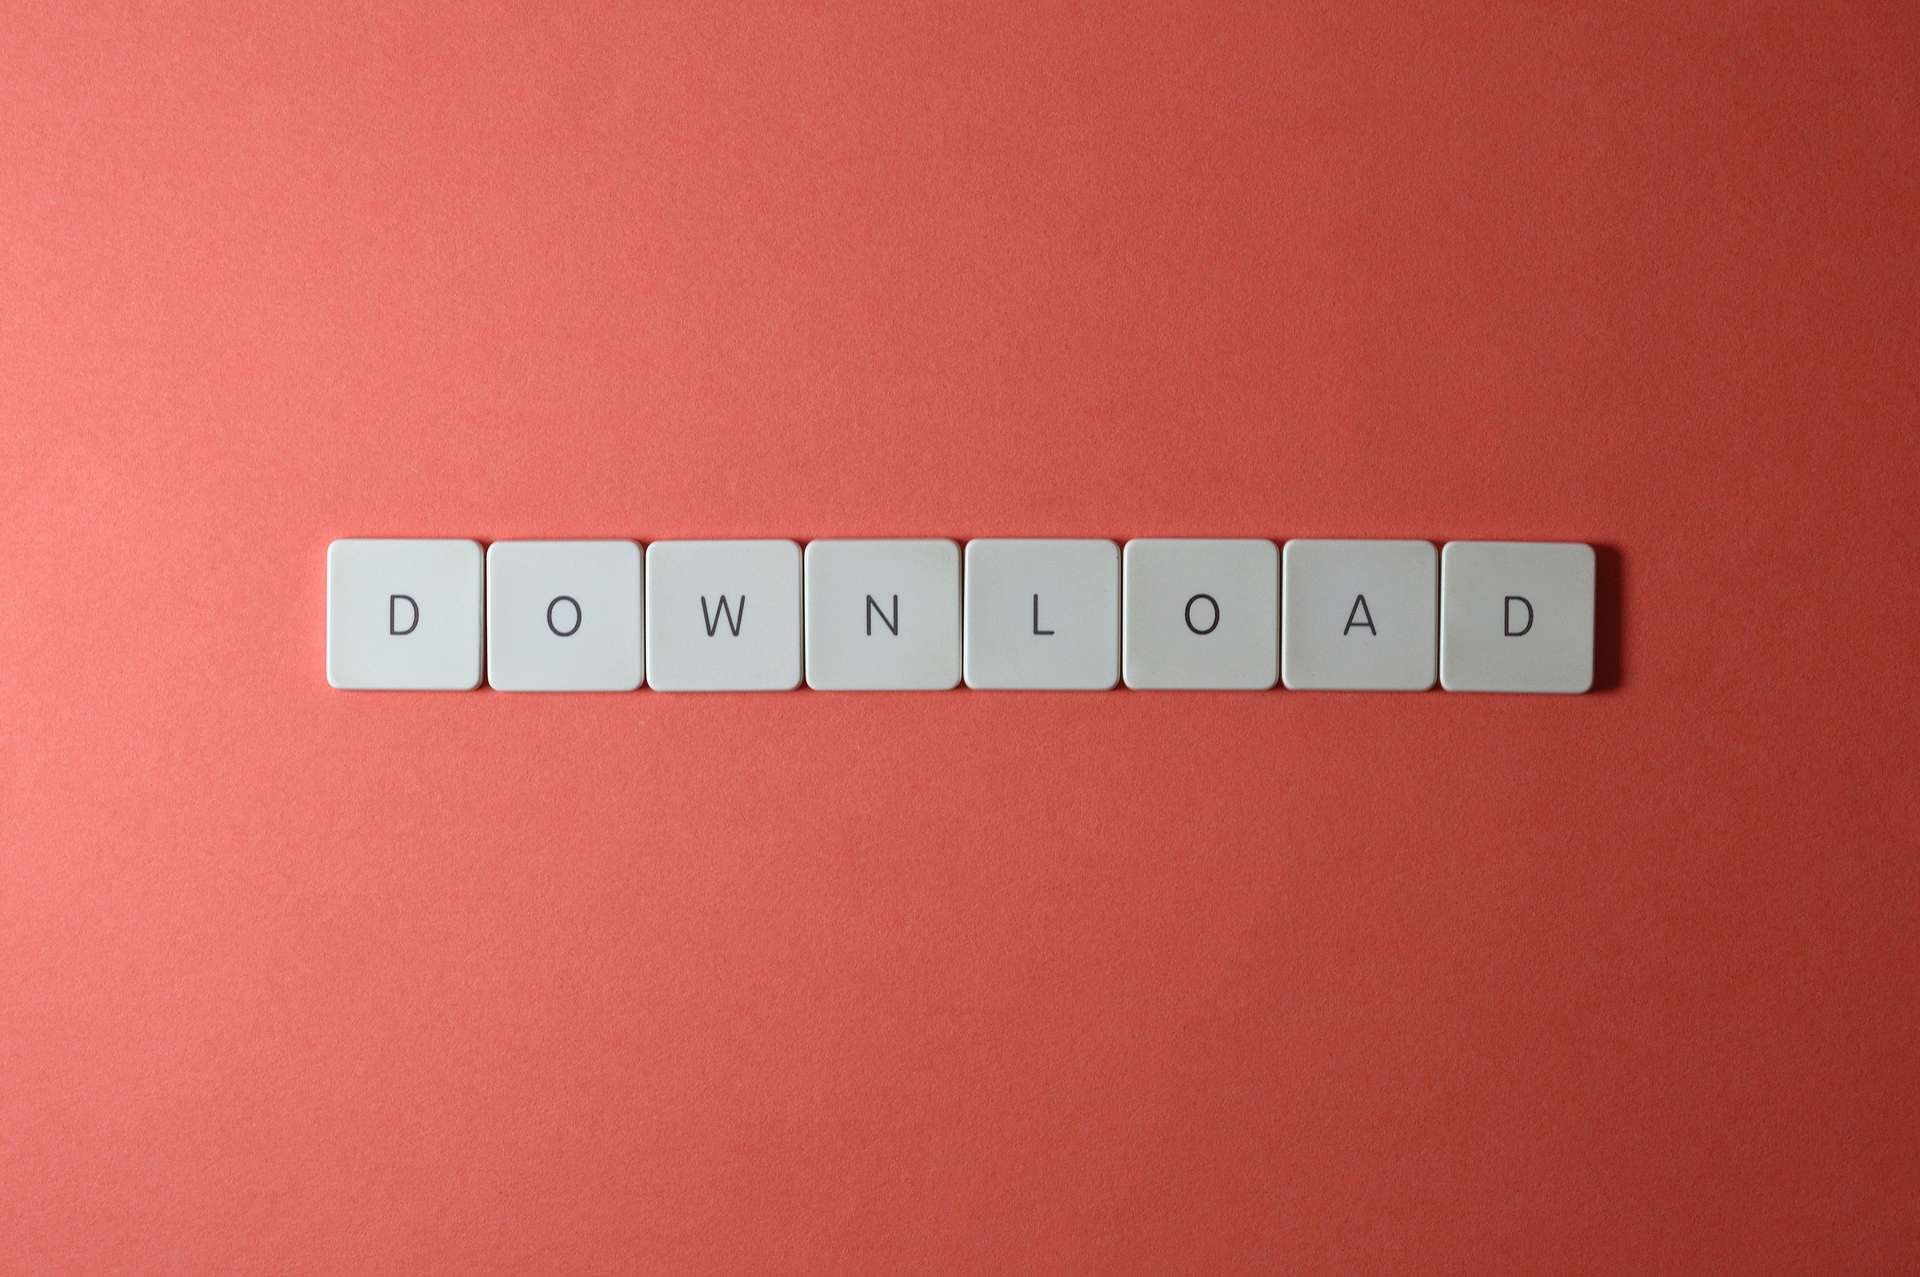 the word download in small tiles